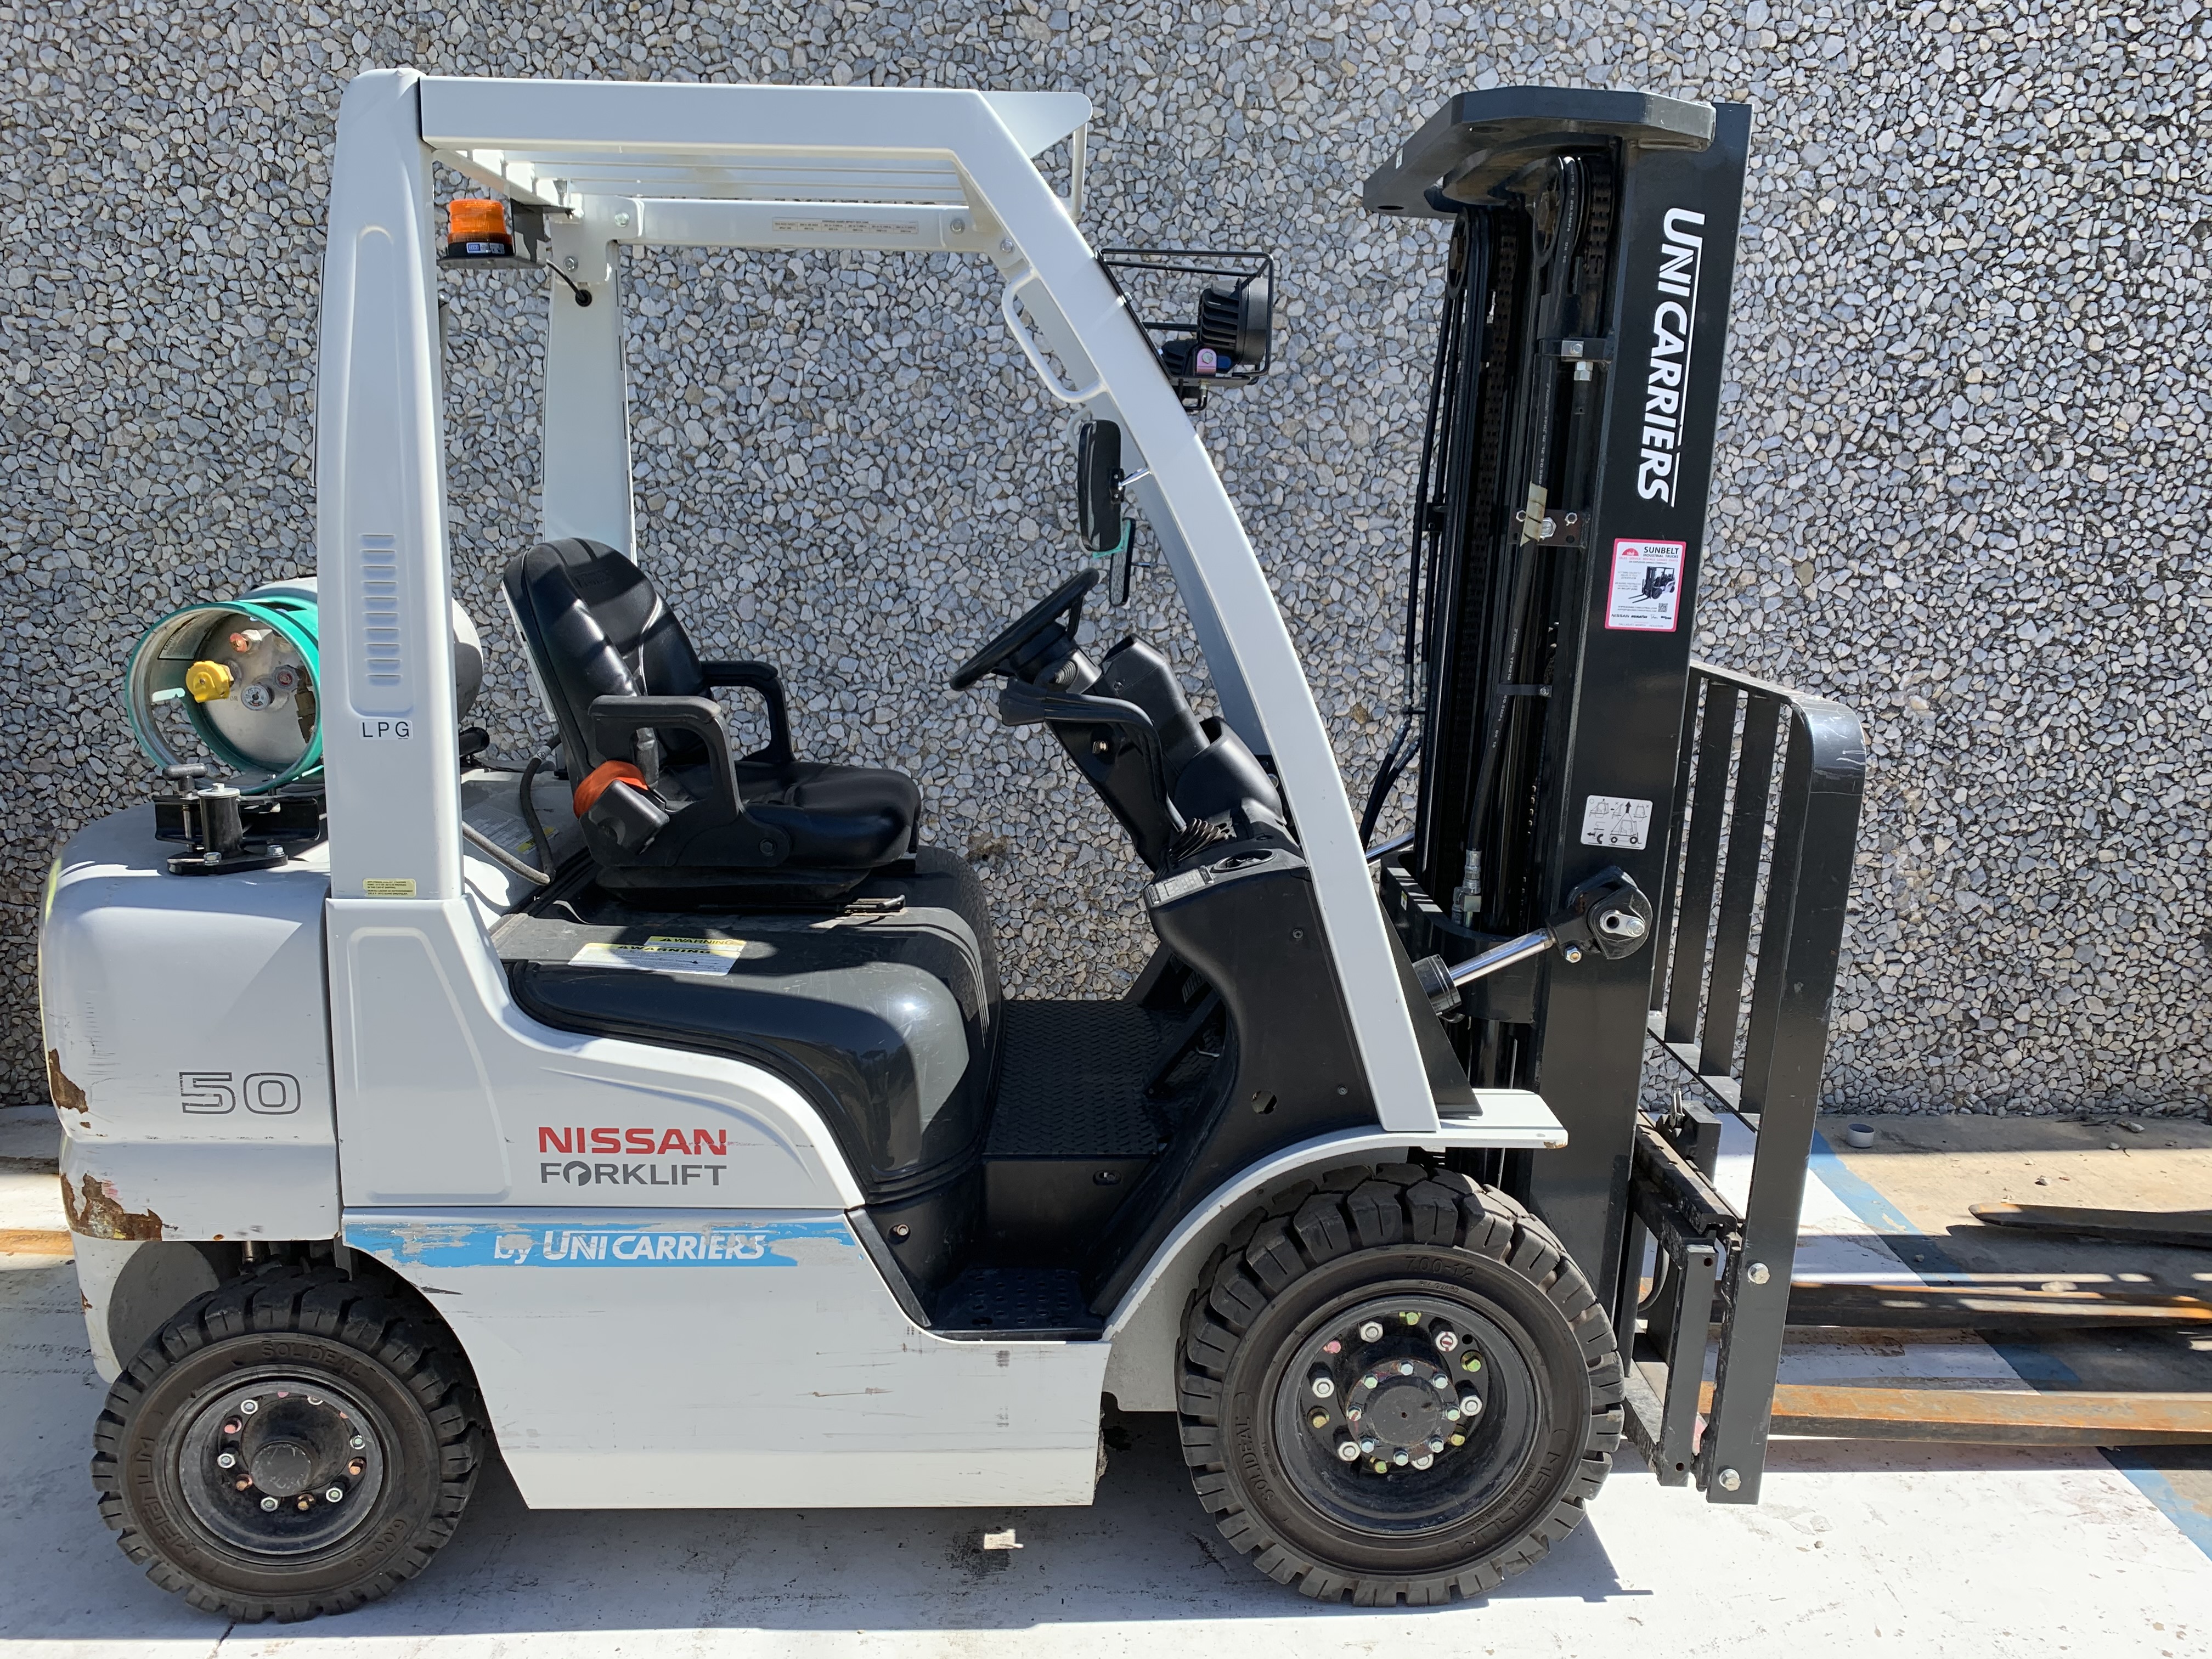 Used Forklift For Sale in Dallas, Fort Worth, Austin, San Antonio, Tulsa, and Oklahoma City